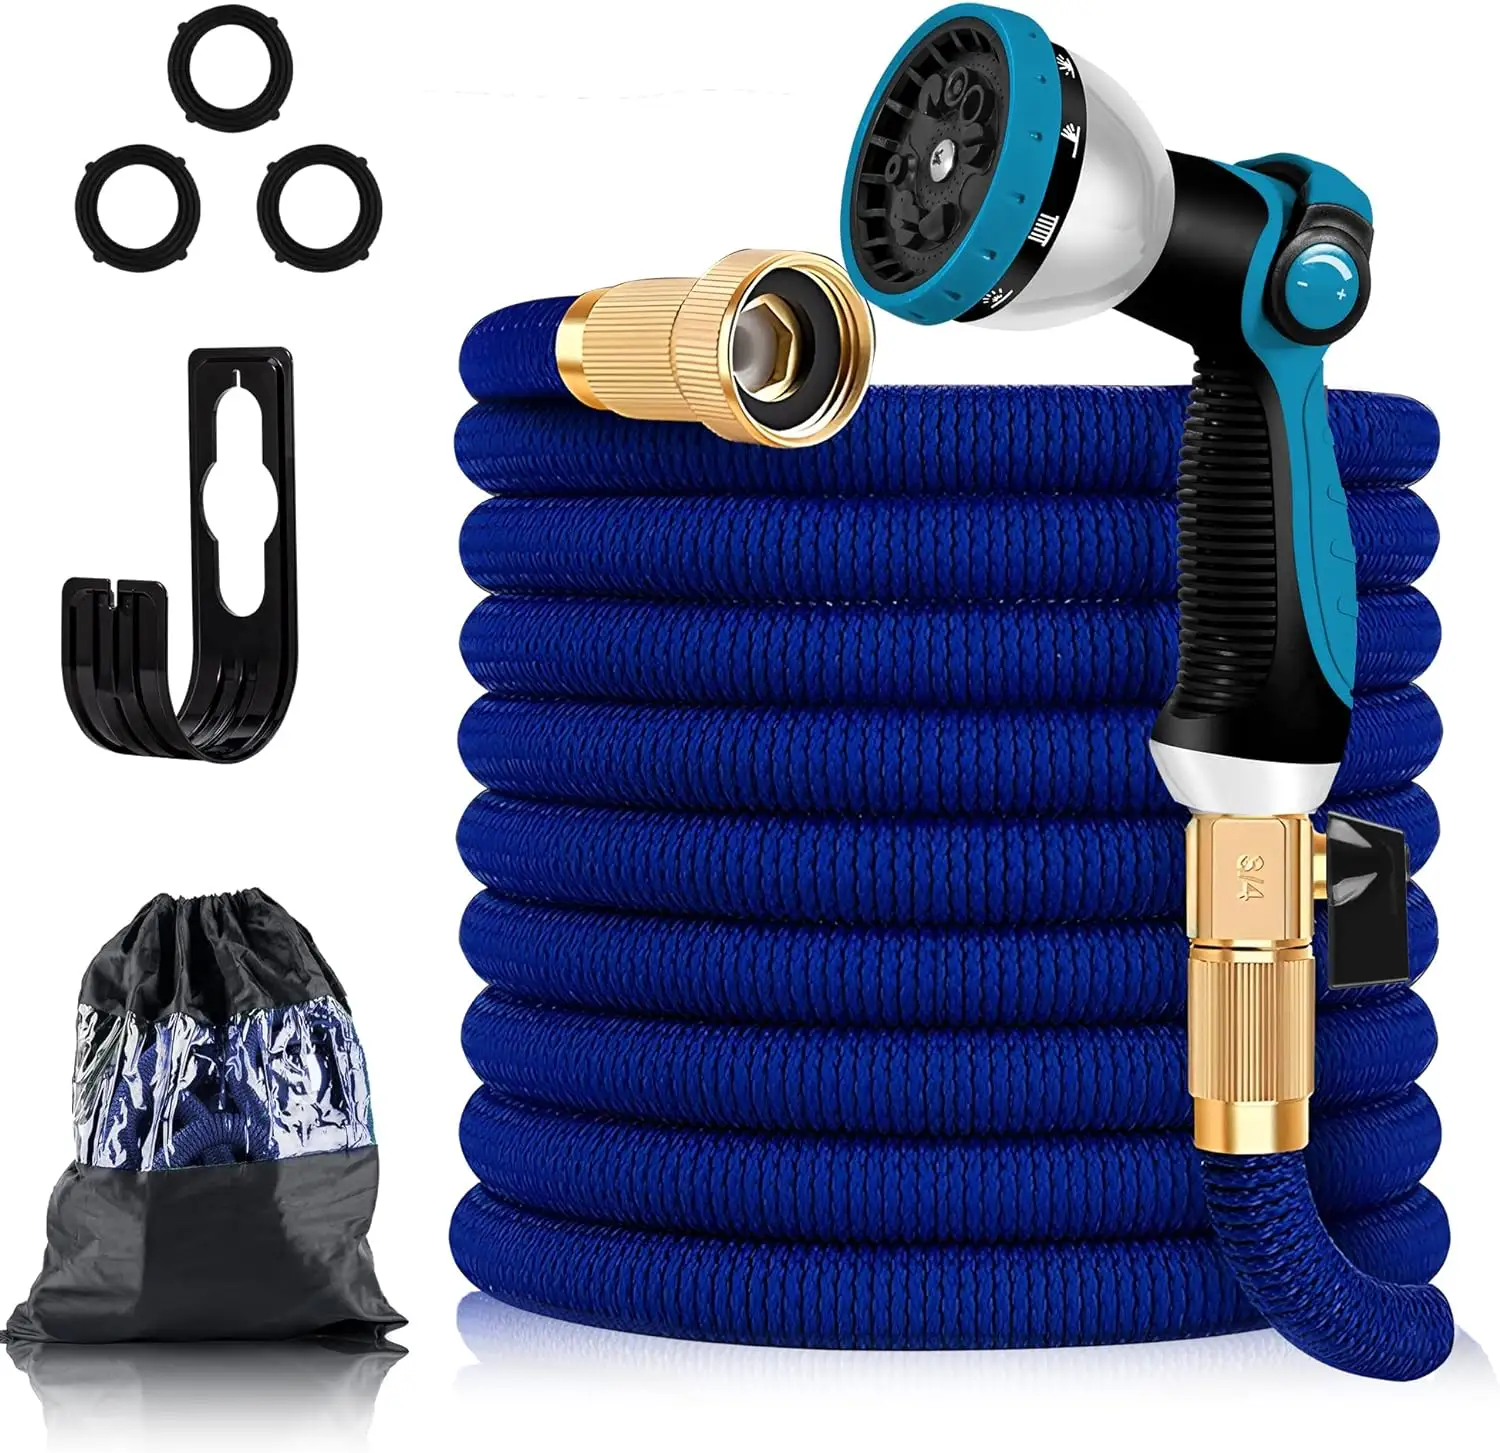 3750D fabric upgraded expandable flexible hose 100ft 3-layer garden hose pipe with holder wall mounted portable garden hose